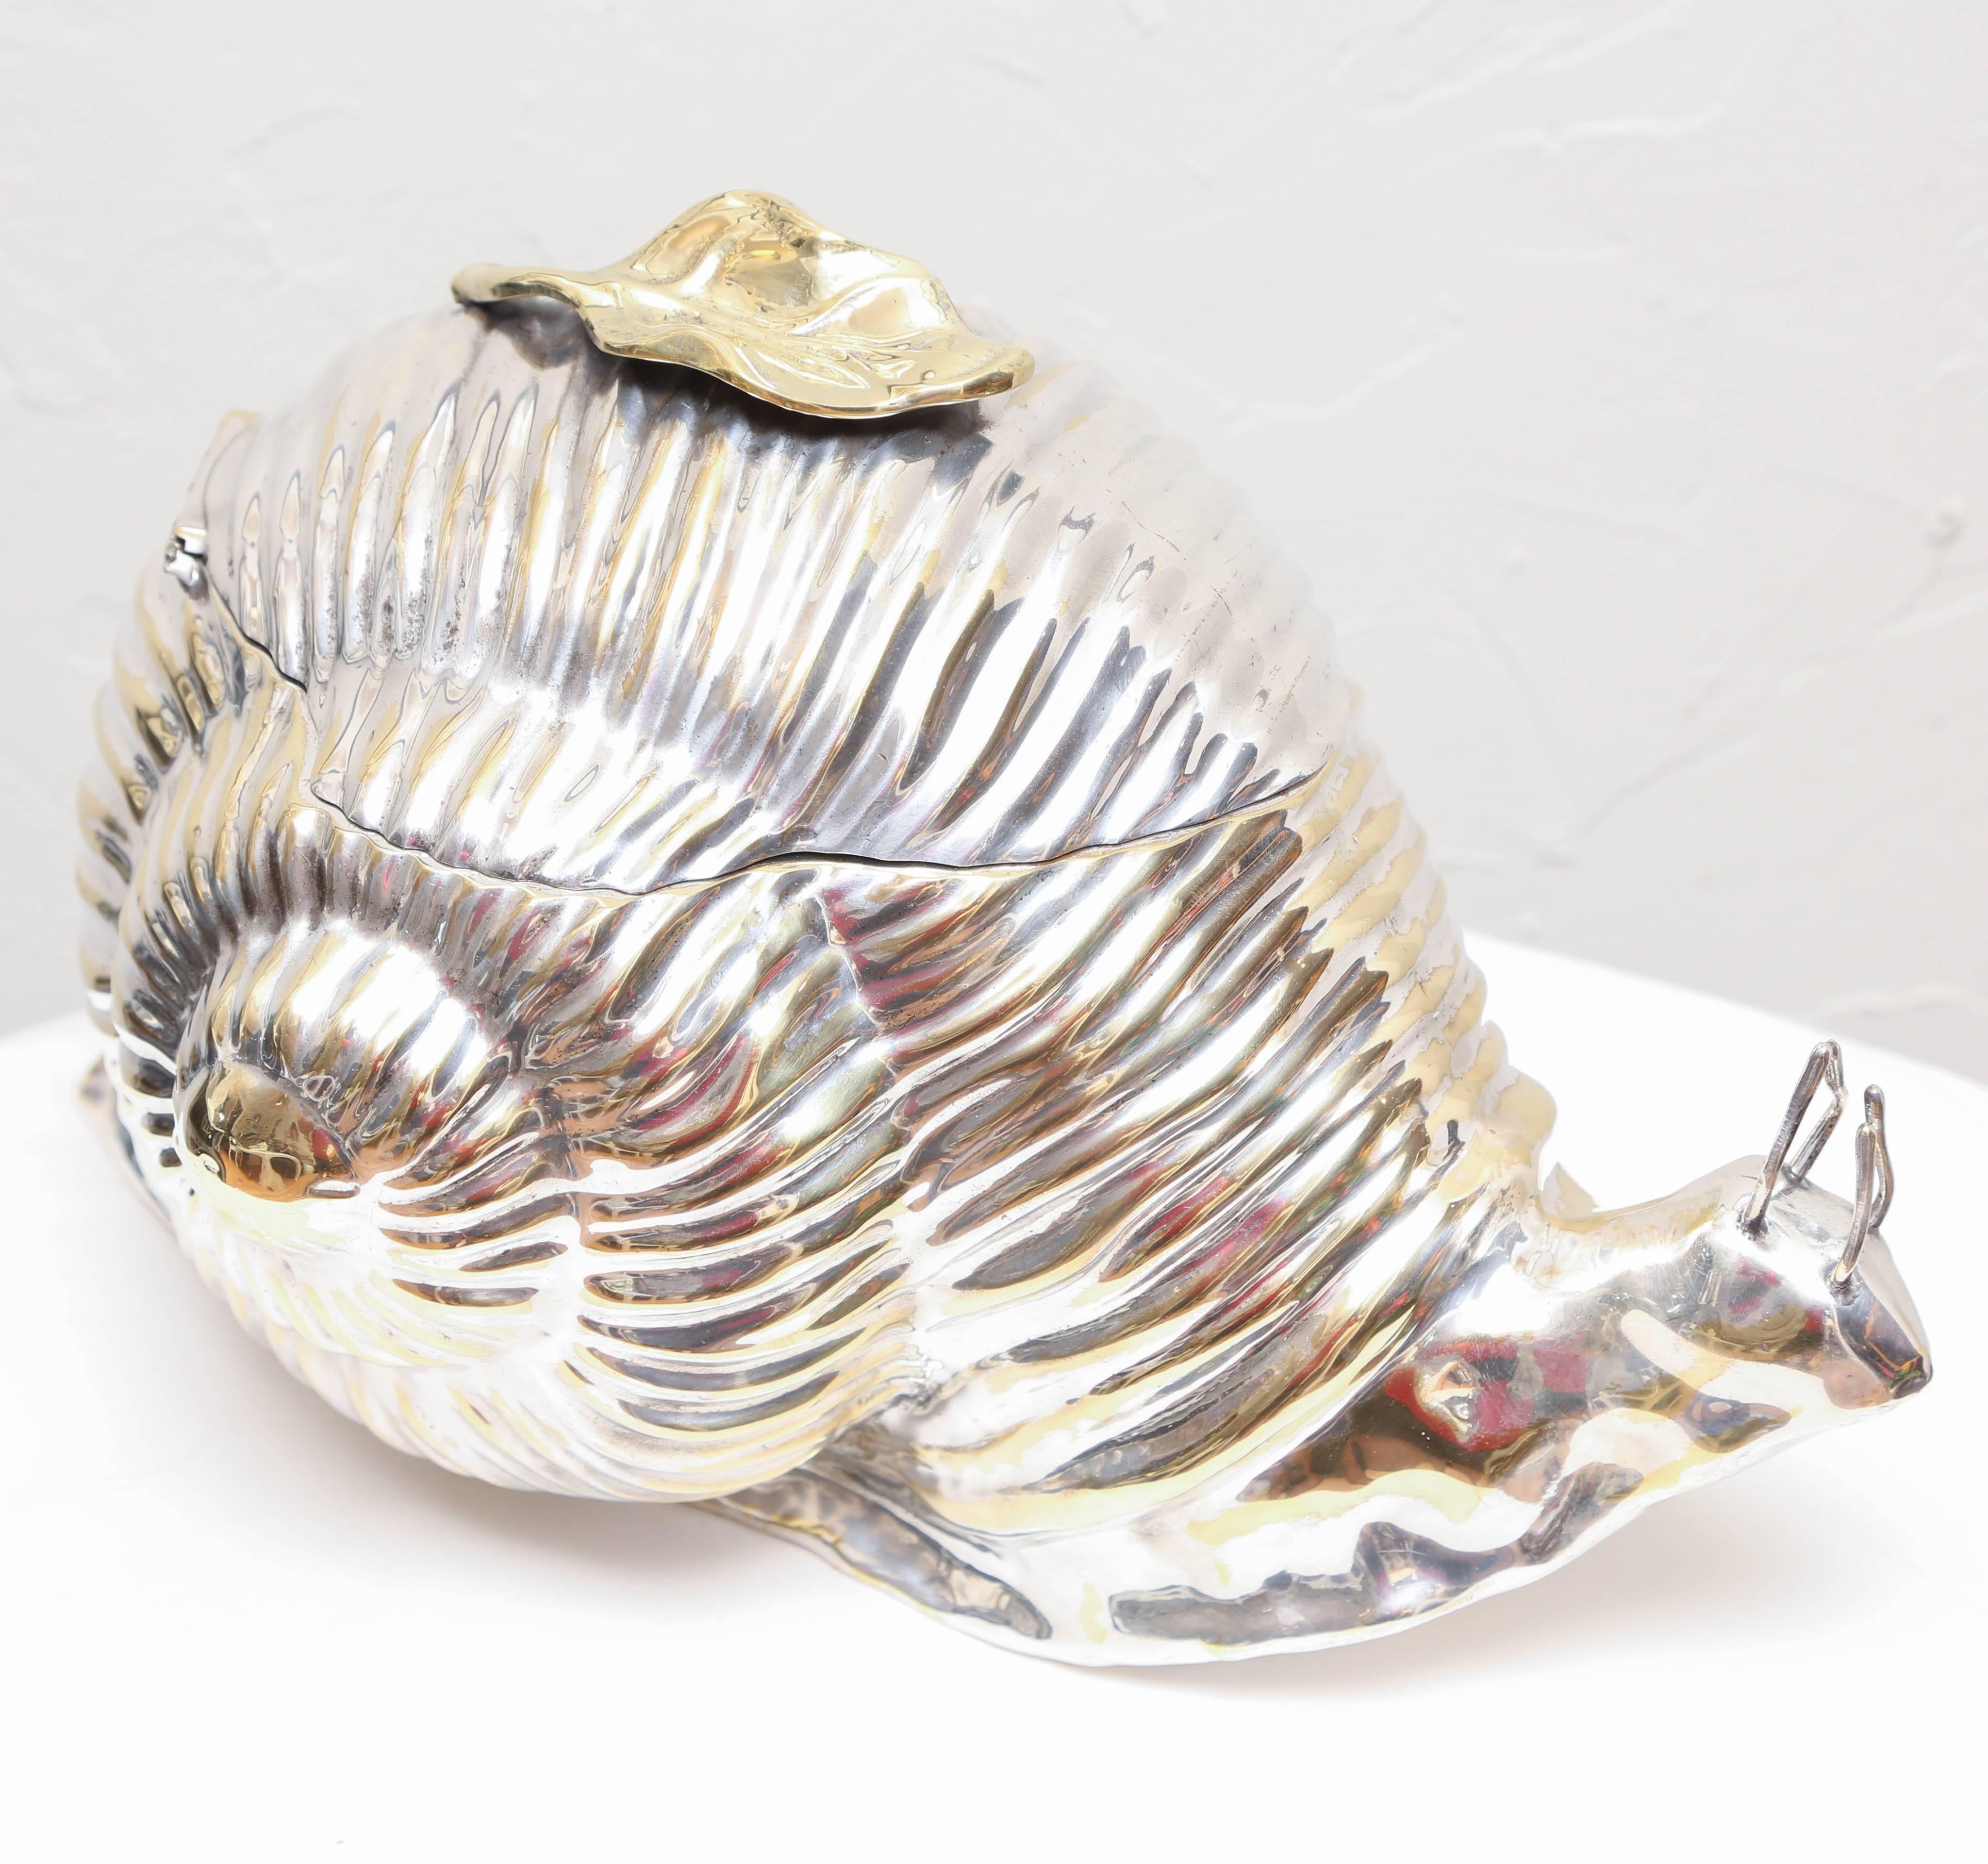 Sculptural silver plated ice bucket in the form of a giant snail. Made in Florence, Italy by Teghini. A highly decorative addition to any bar.